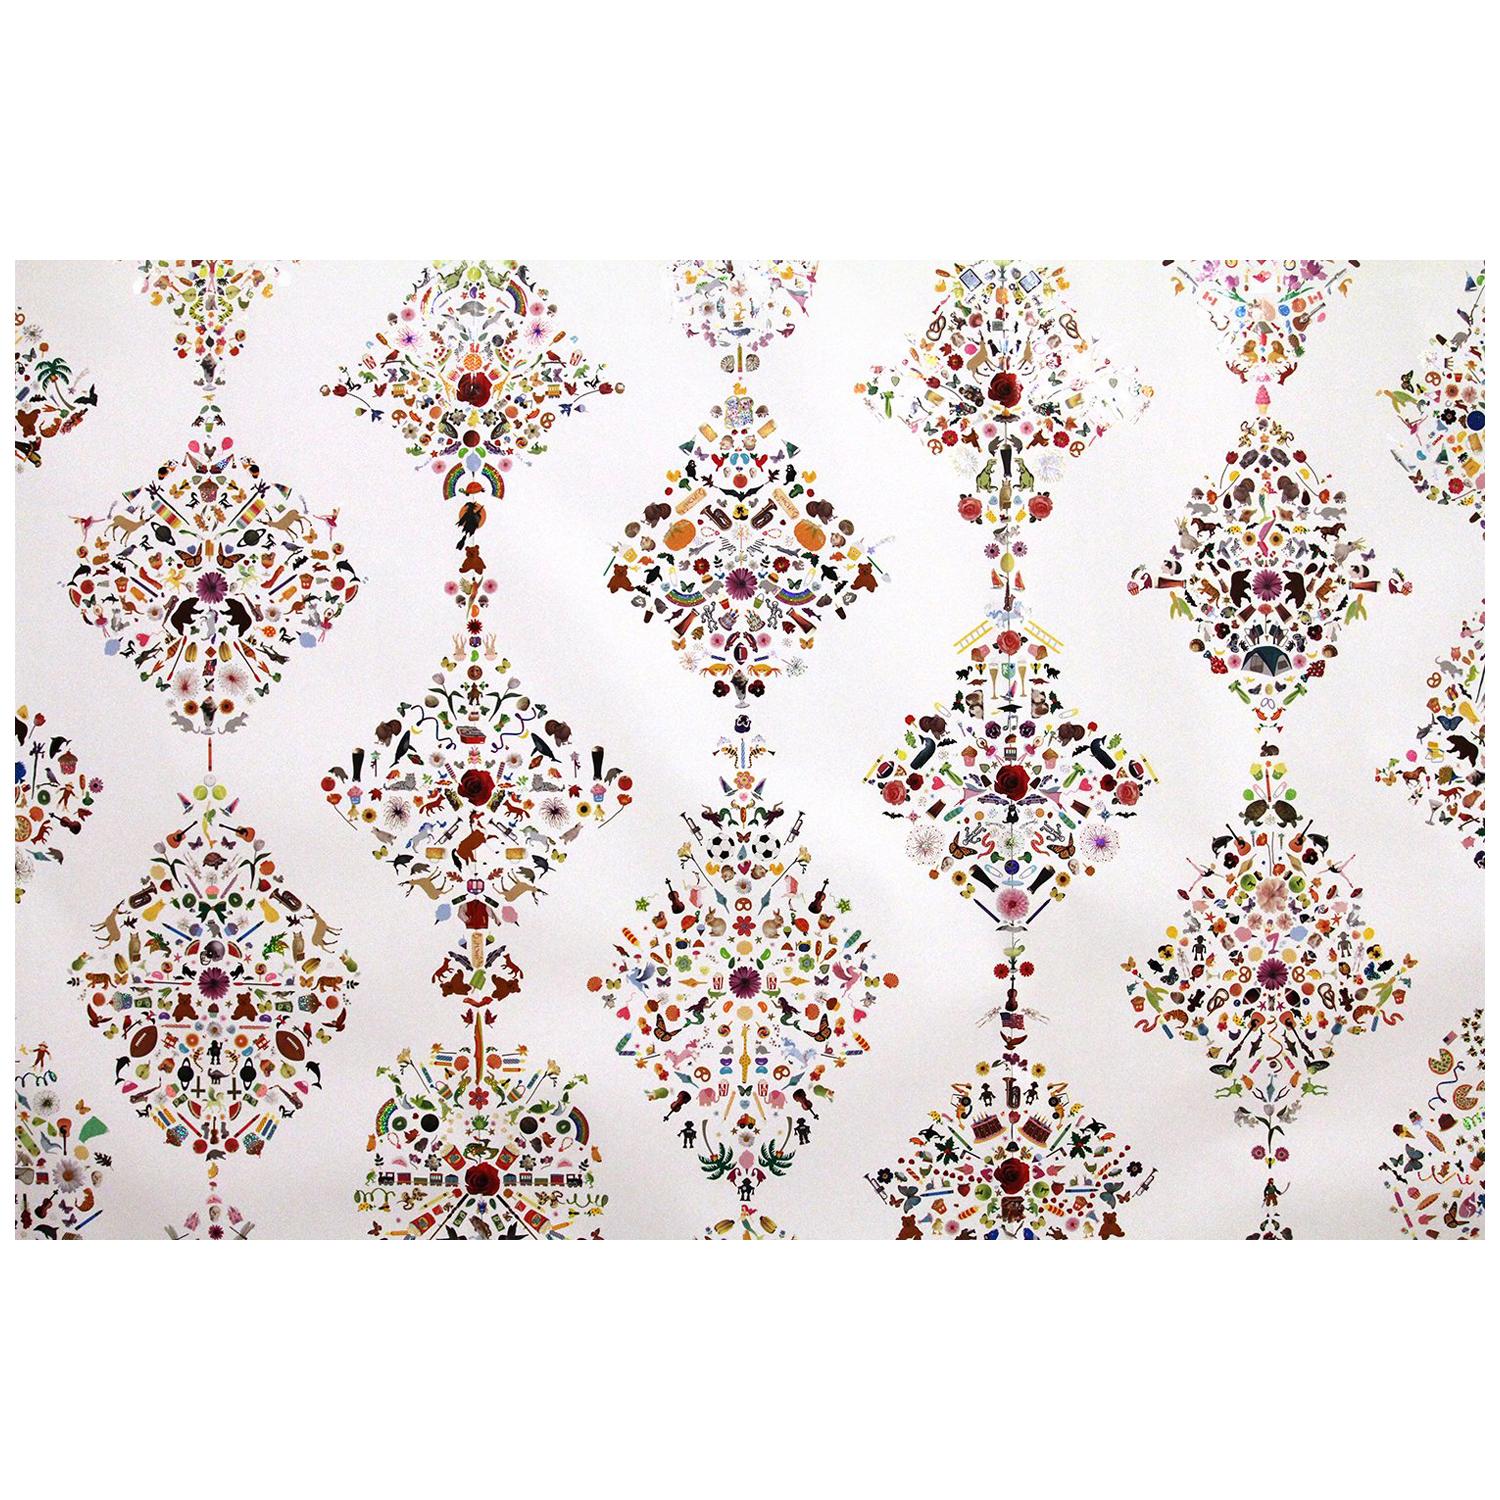 Signature Damask Wallpaper with Multicolored, Hand Applied Stickers im Angebot